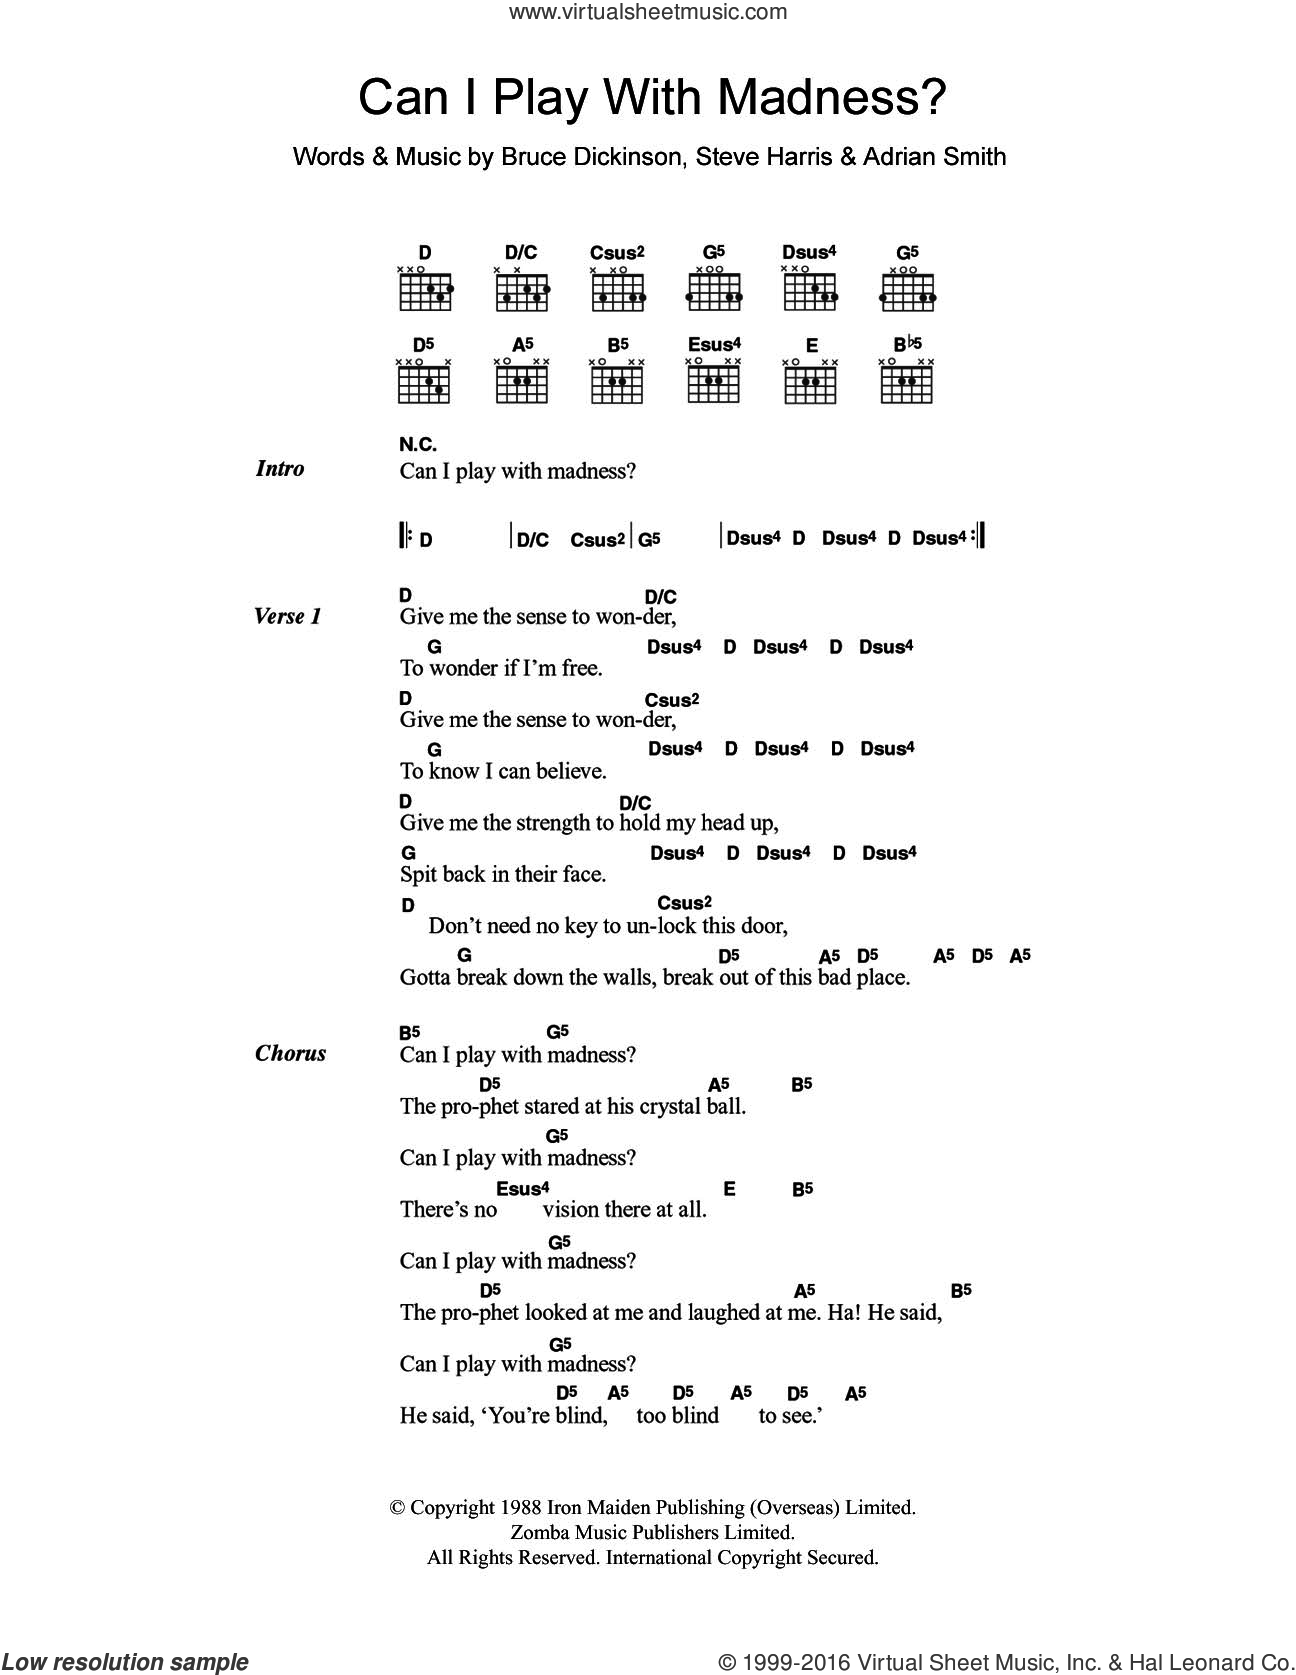 Can I Play With Madness? sheet music for guitar (chords) (PDF)